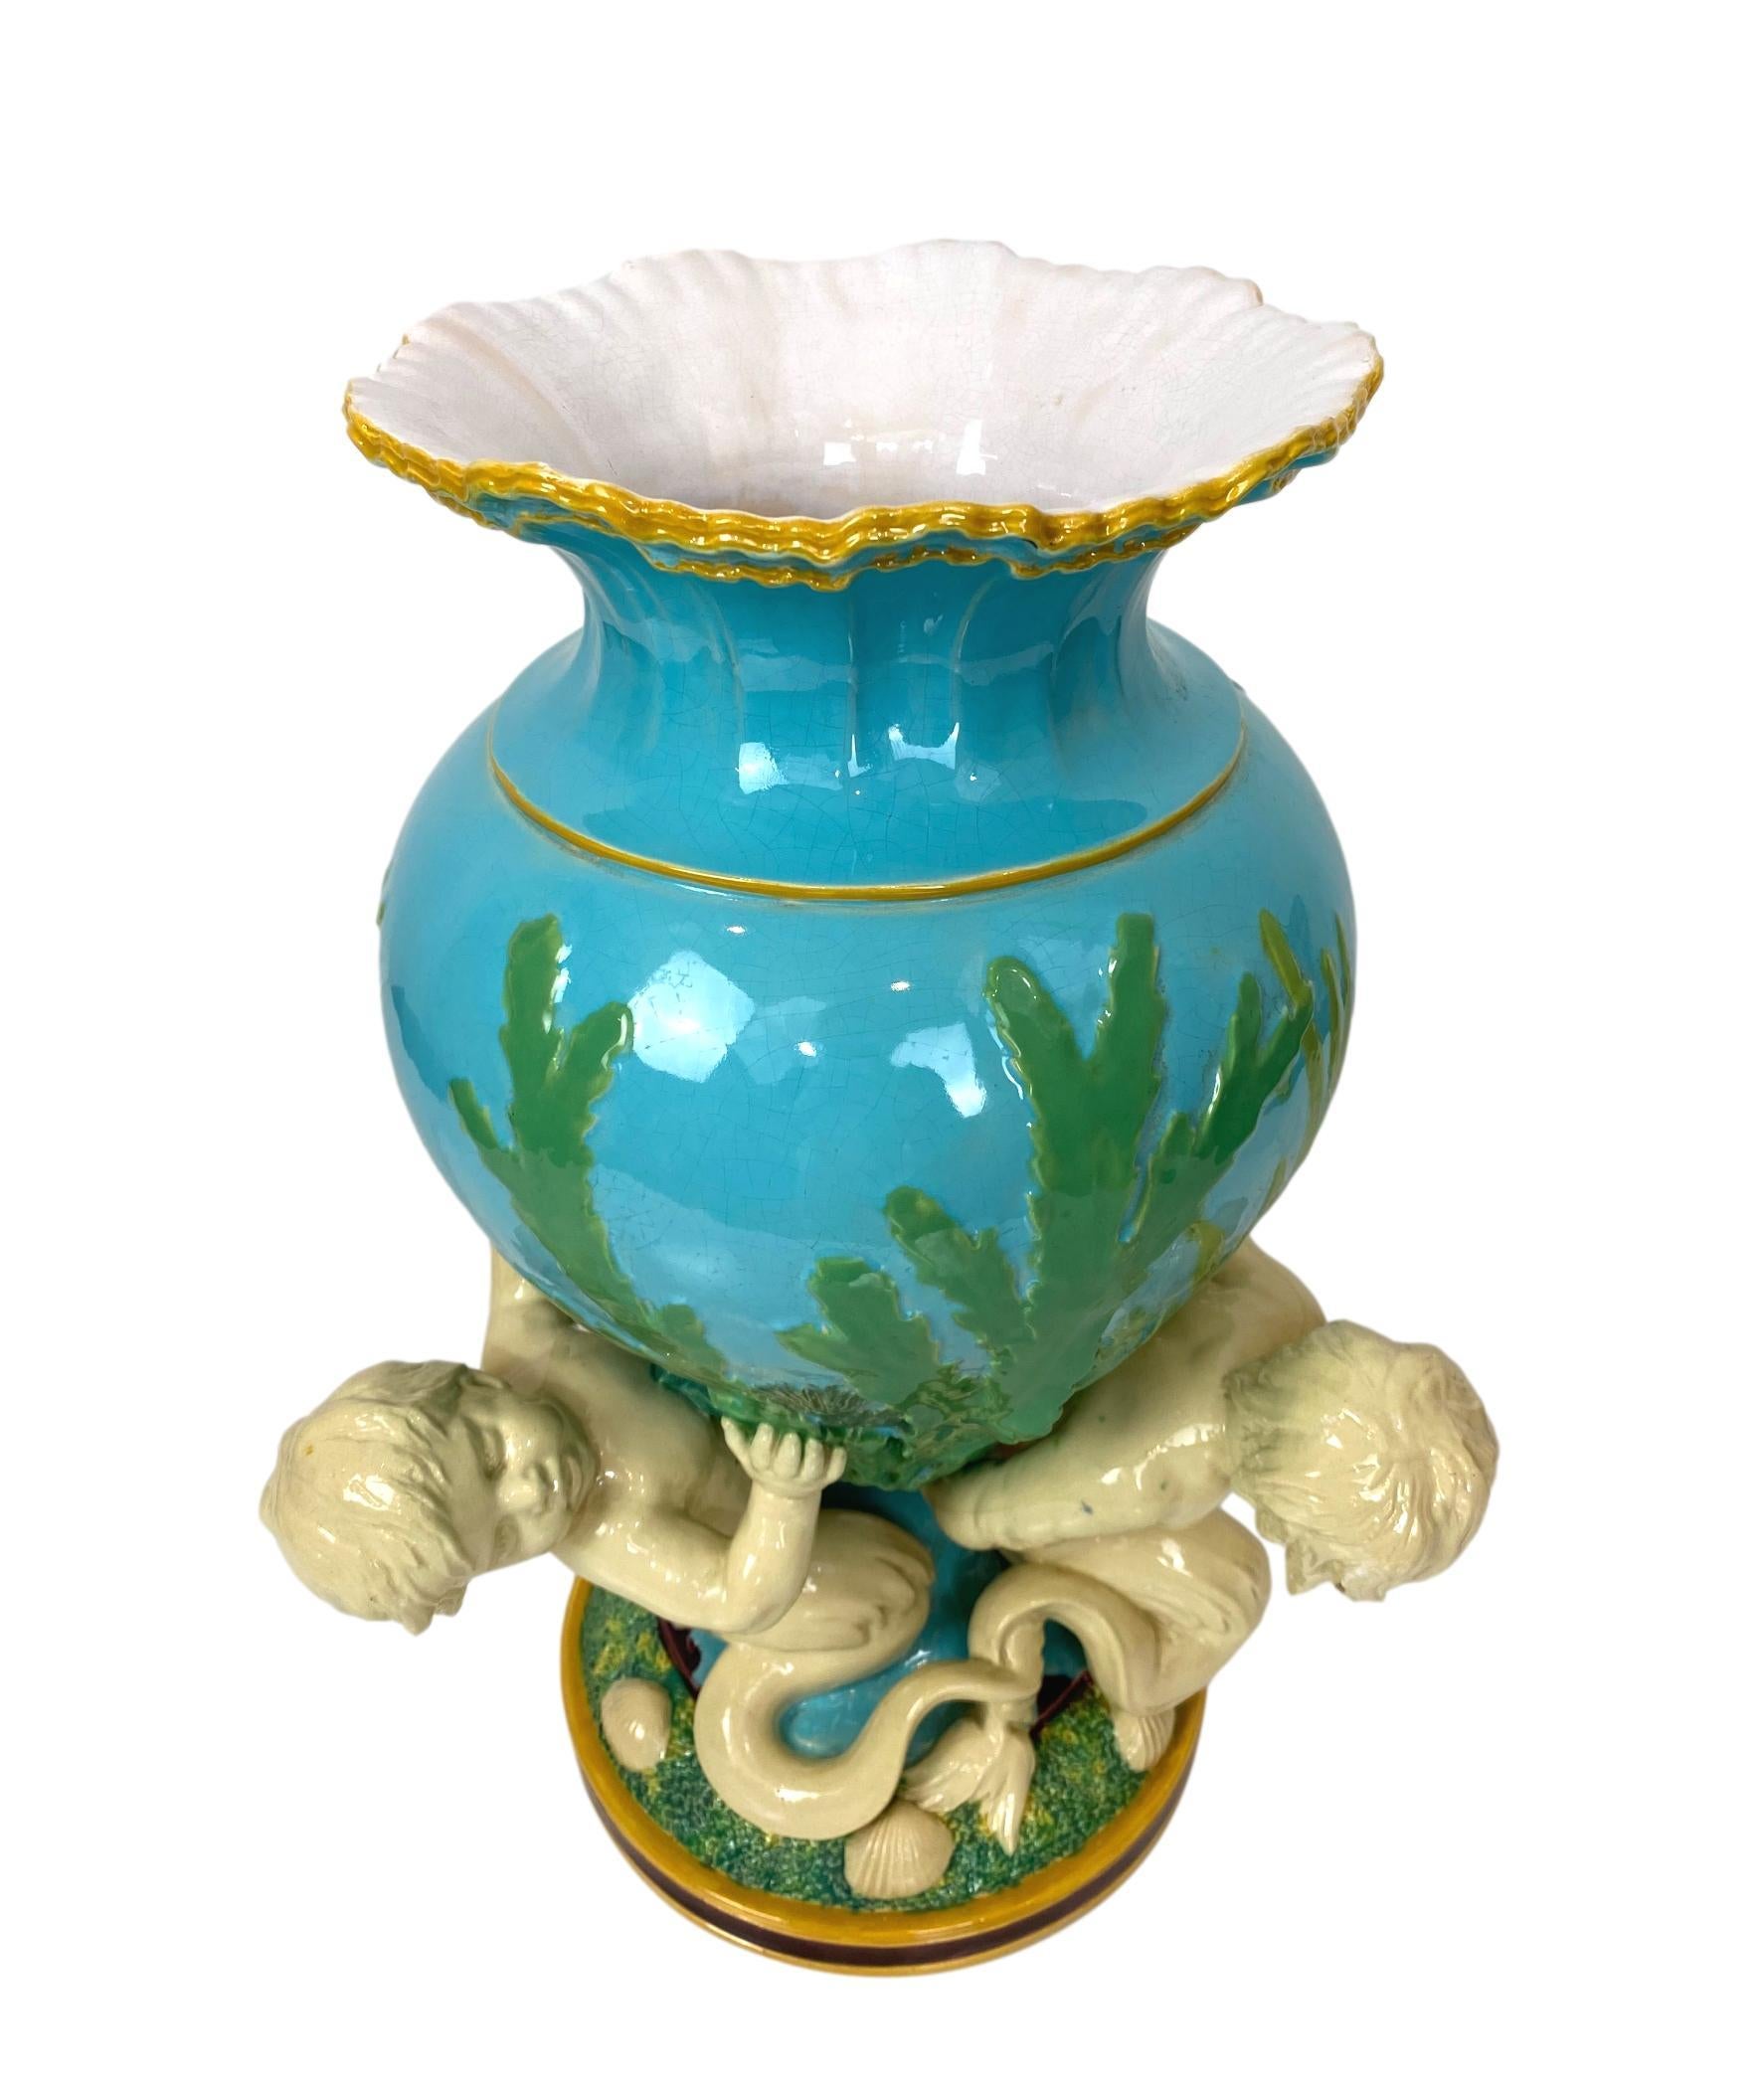 Minton Majolica Triton Marine Vase in Green, Turquoise, and Pink, ca. 1855 7